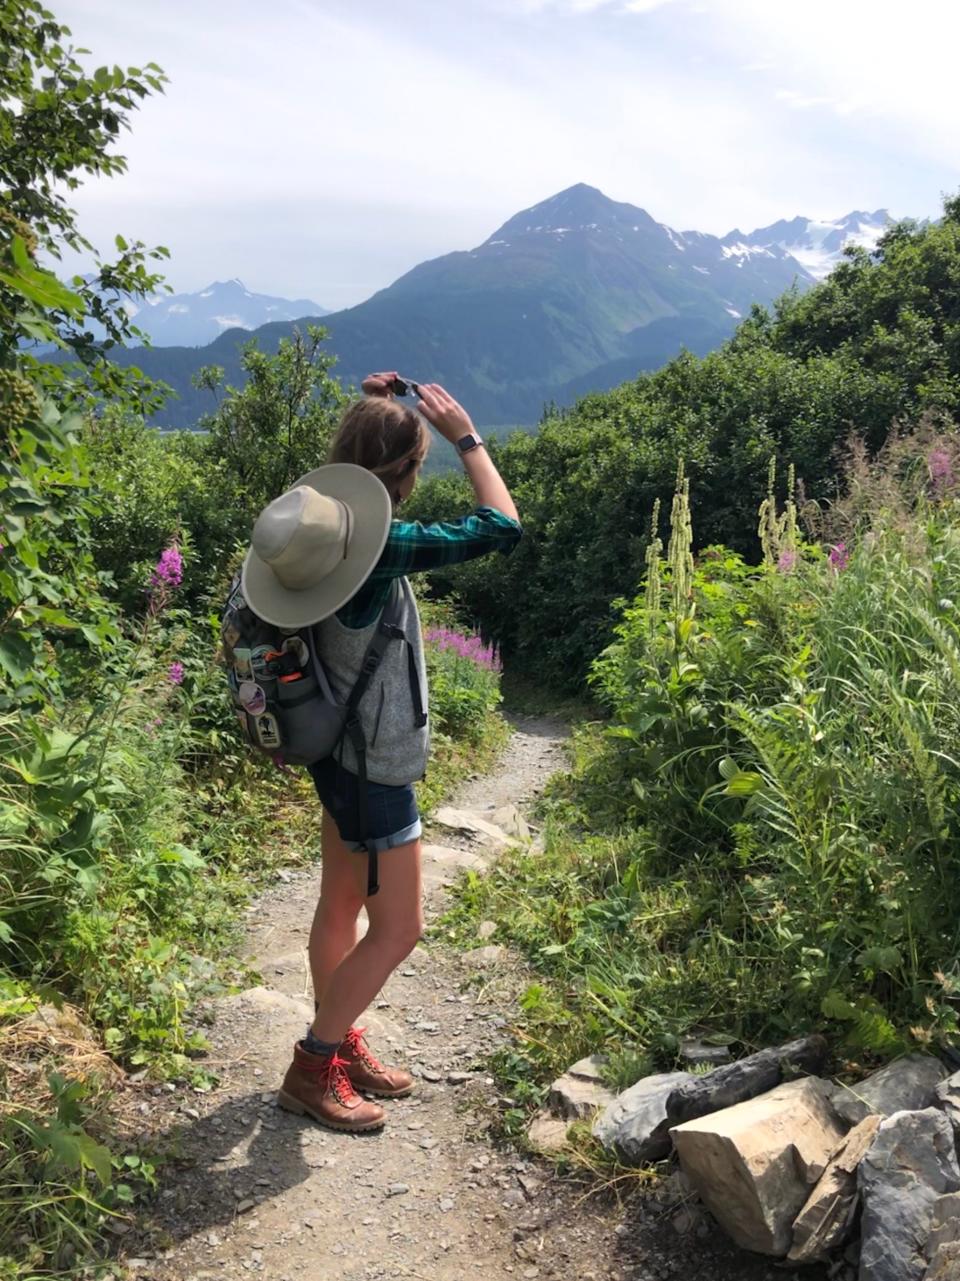 Emily, wearing a hat on her back, hiking boots, shorts, and a vest, looks out towards the mountains on an overgrown trail. 